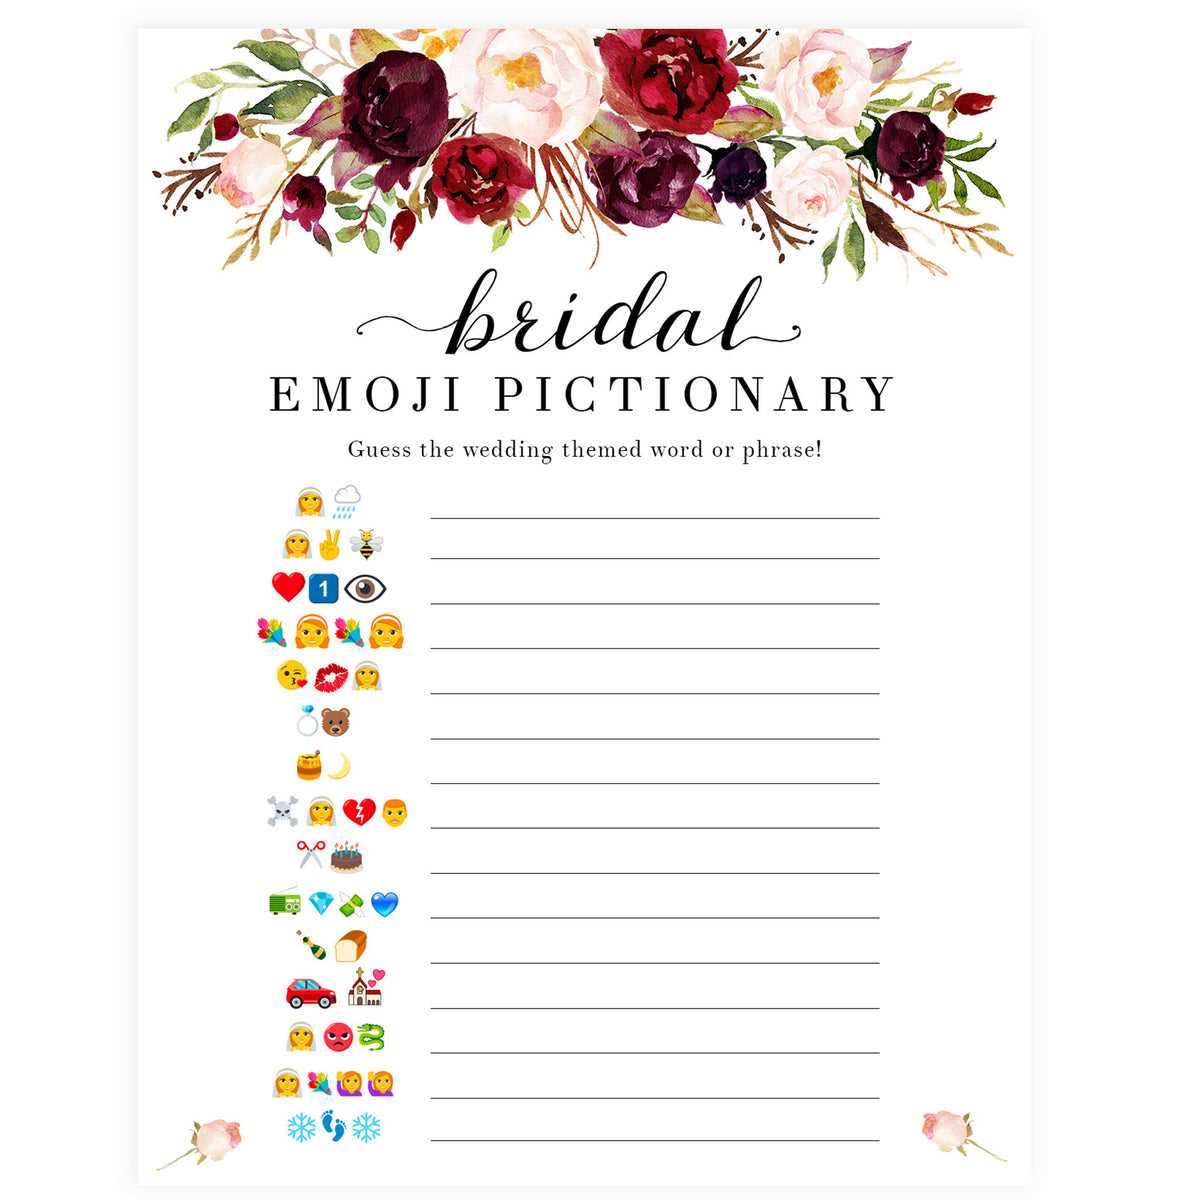 Wedding Emoji Pictionary Answers for Common Wedding Items